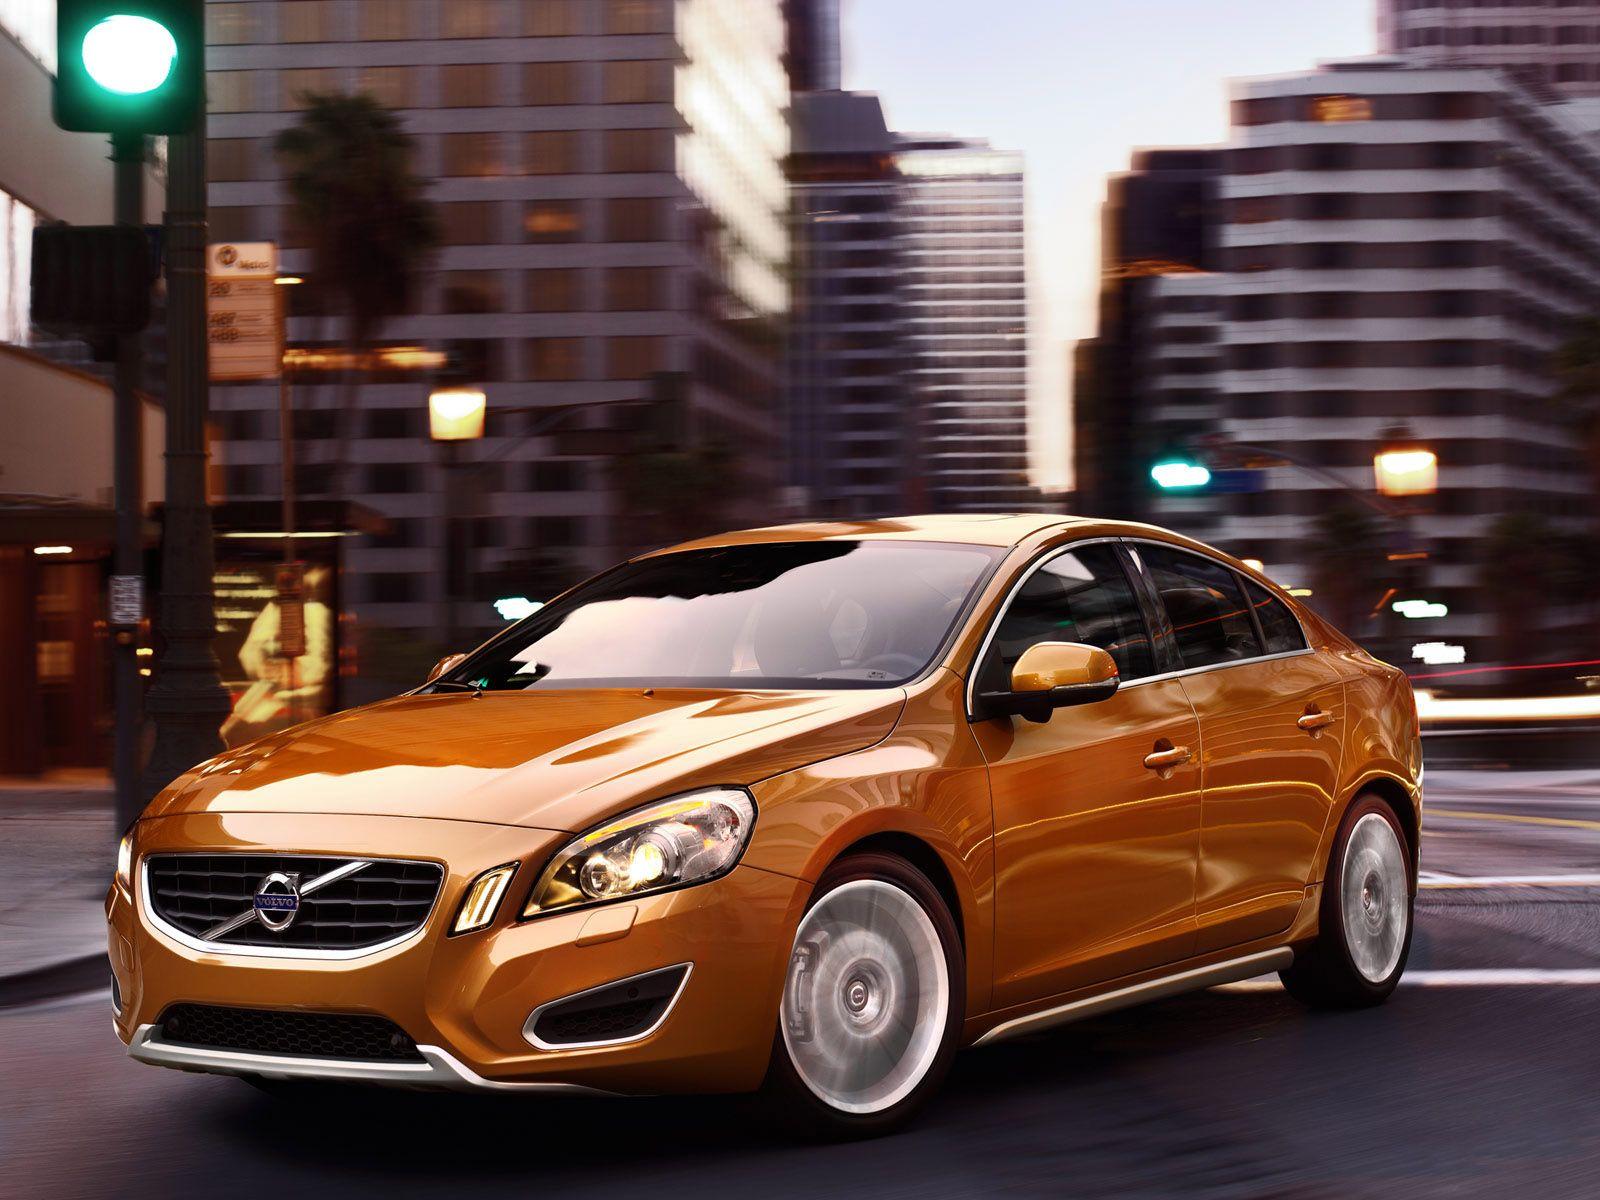 Volvo S60 wallpaper and image, picture, photo